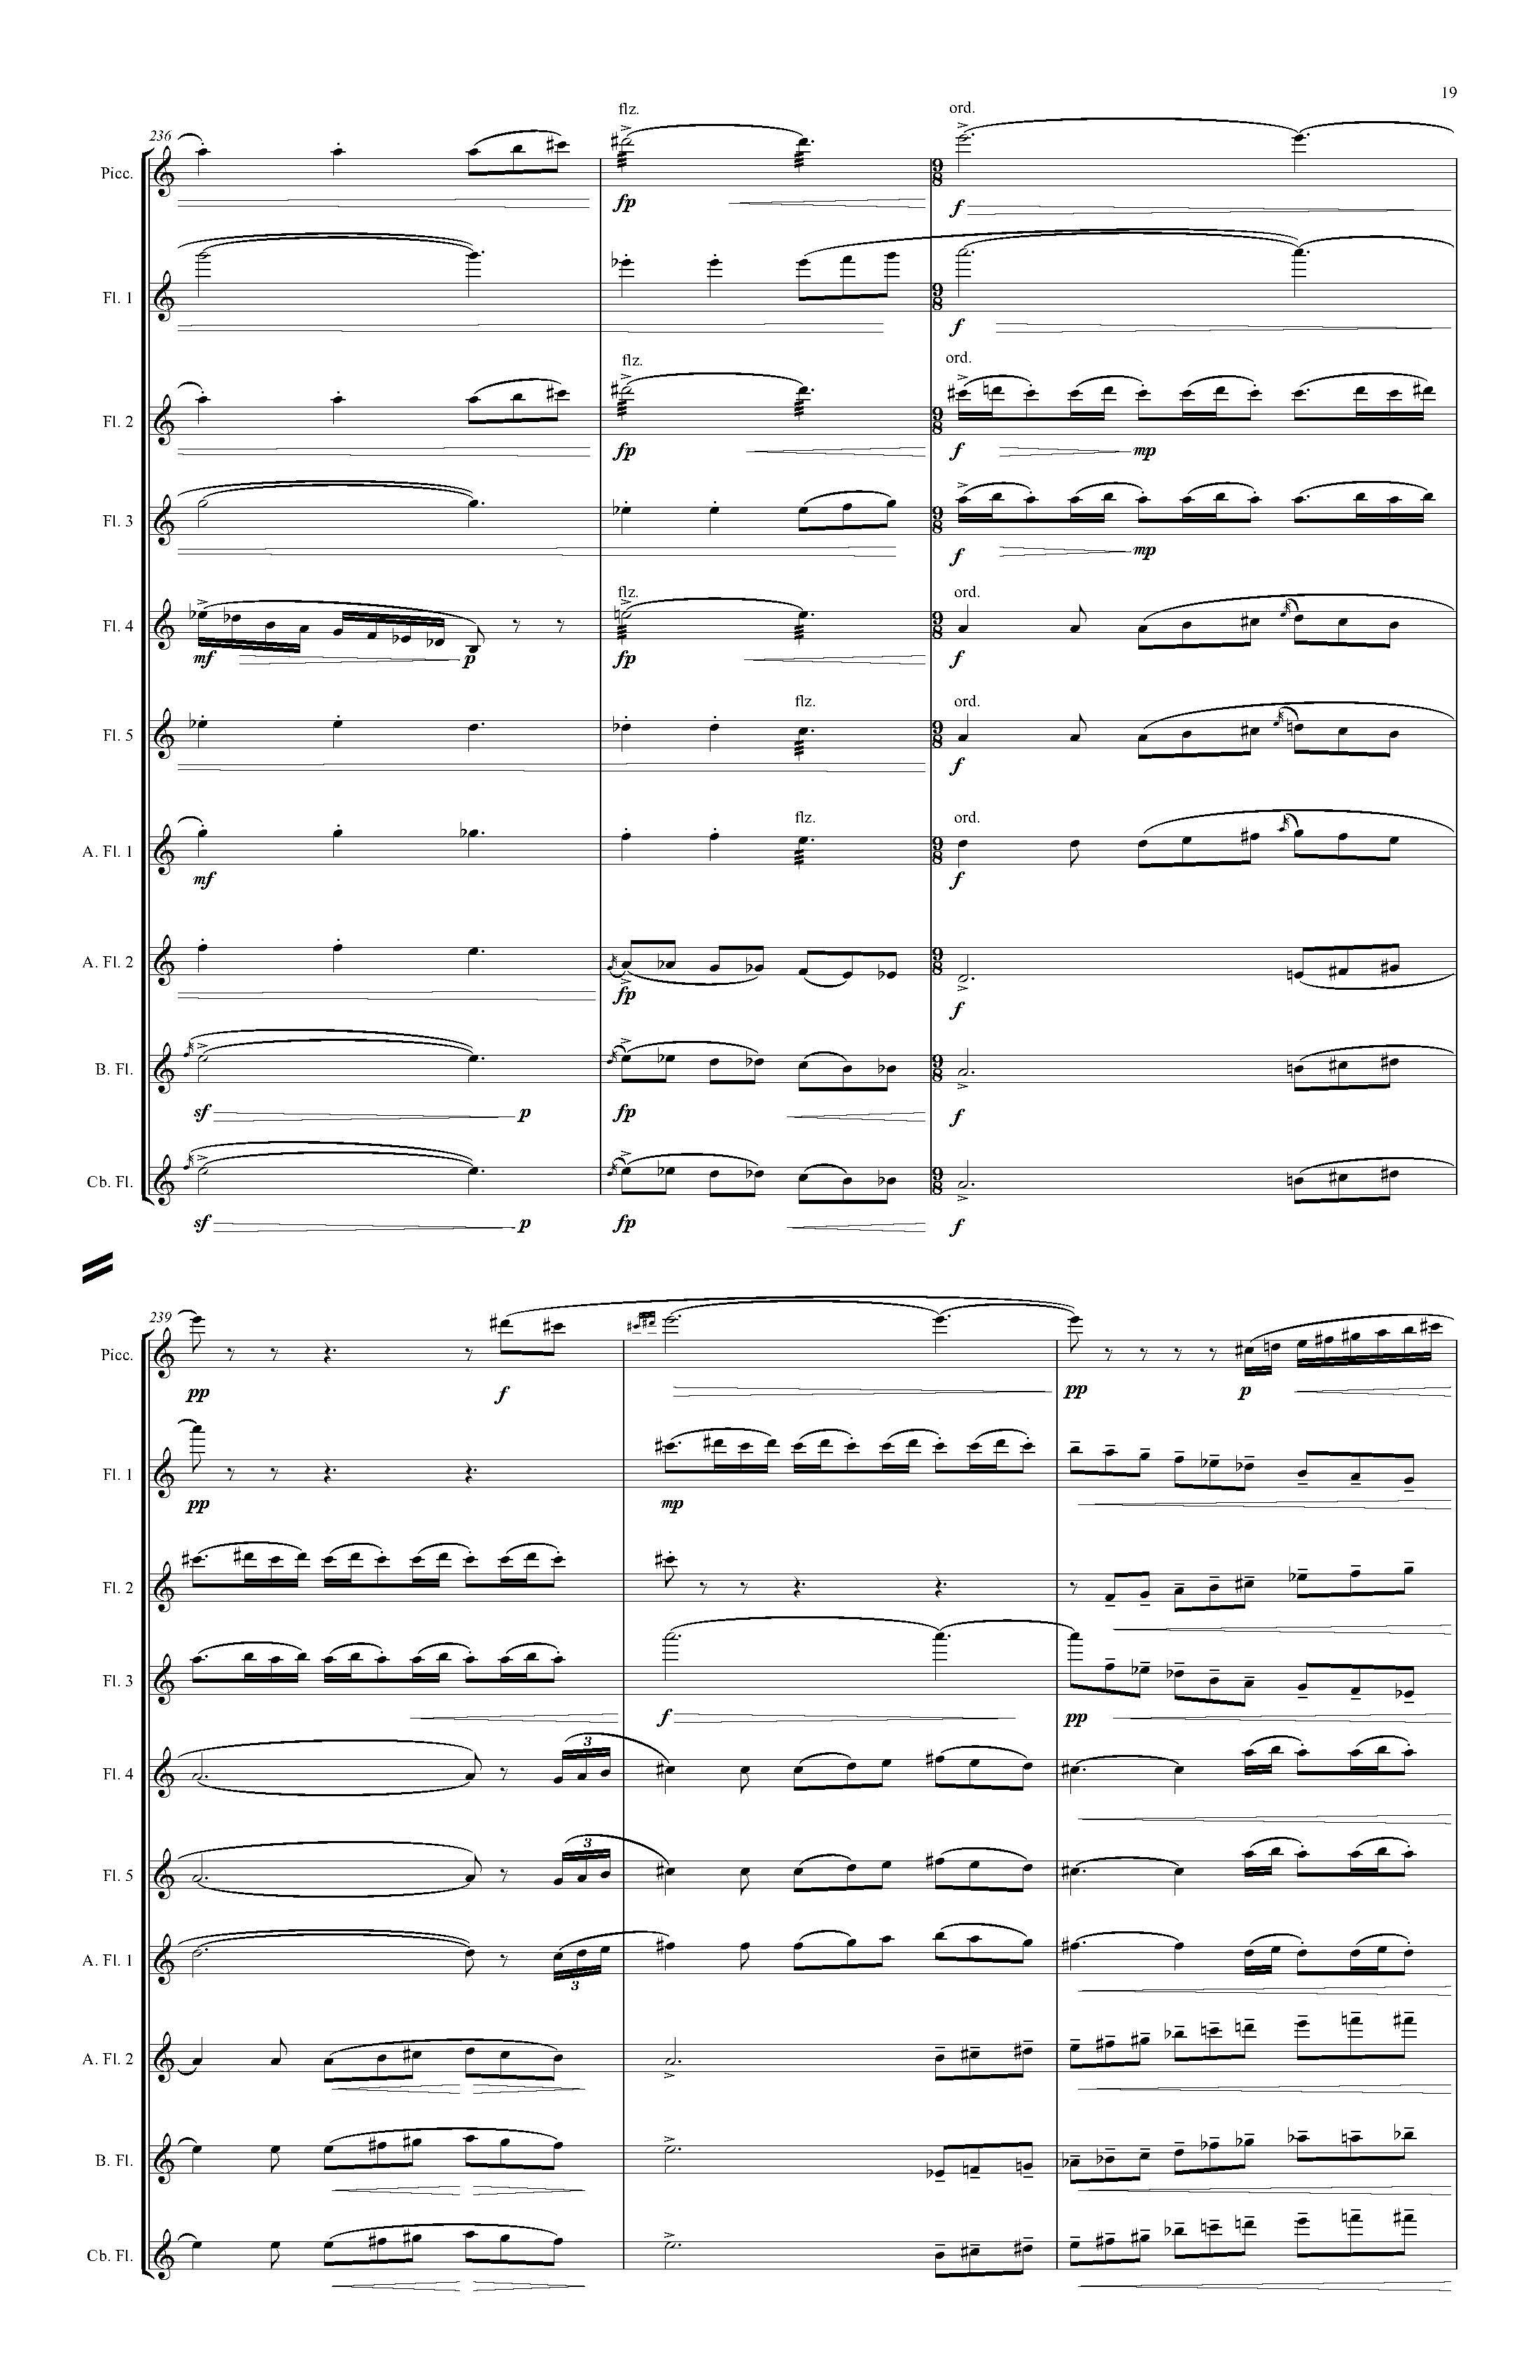 PIPES - Complete Score_Page_25.jpg